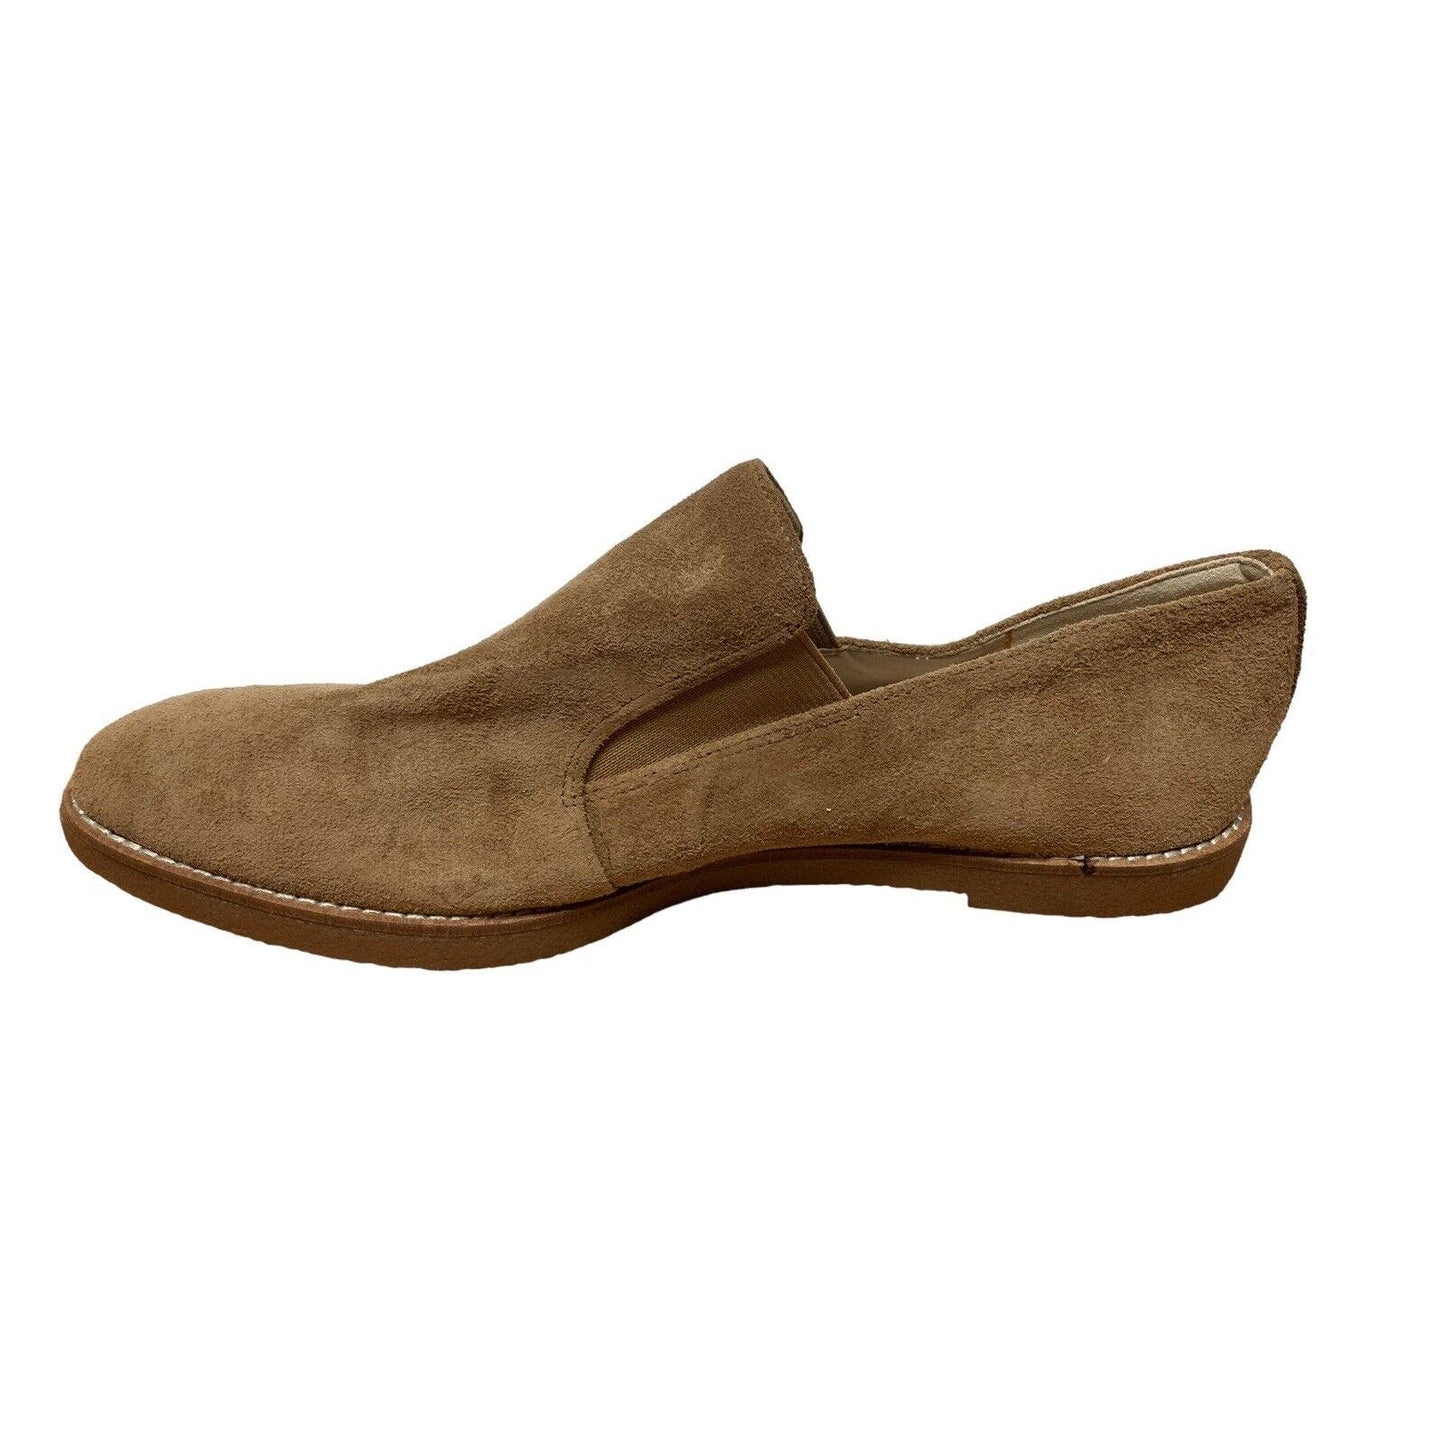 Nine West Quinko Suede Leather Slip On Loafer Women's US 9.5 M Tan Brown